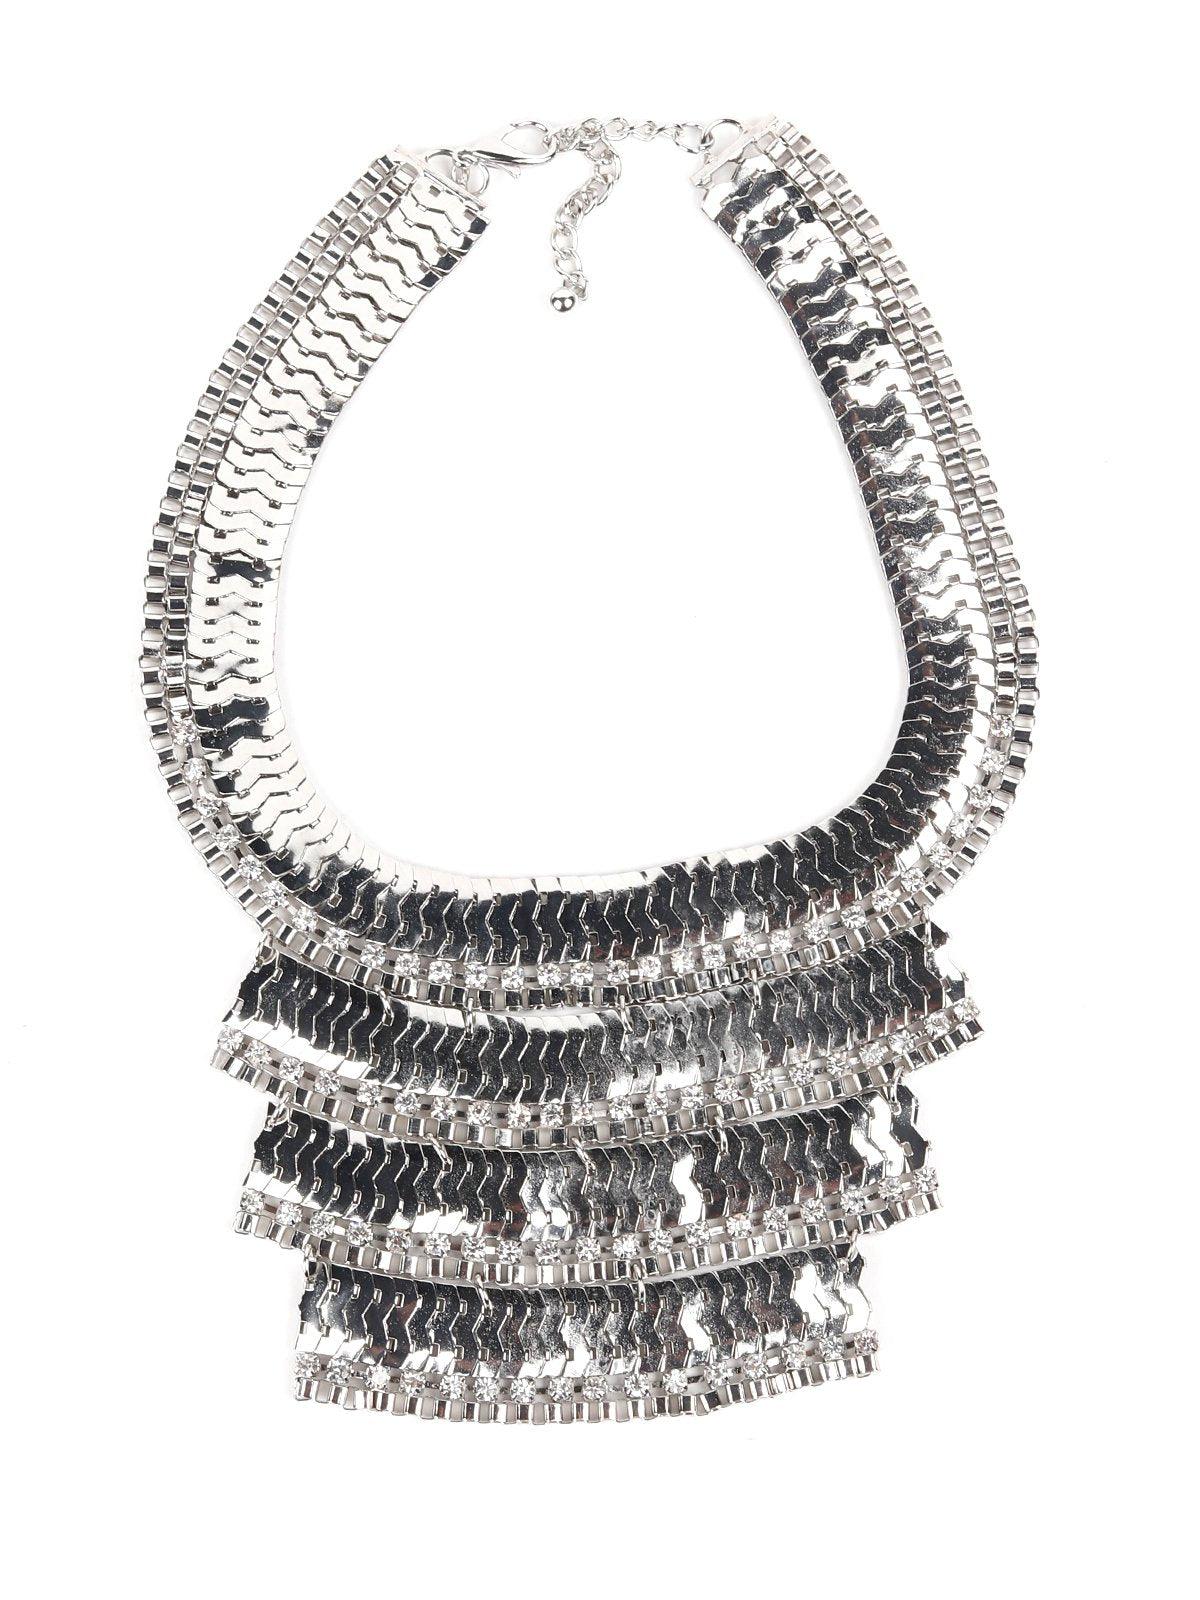 Oxidised Silver-Plated Layered Necklace - Odette